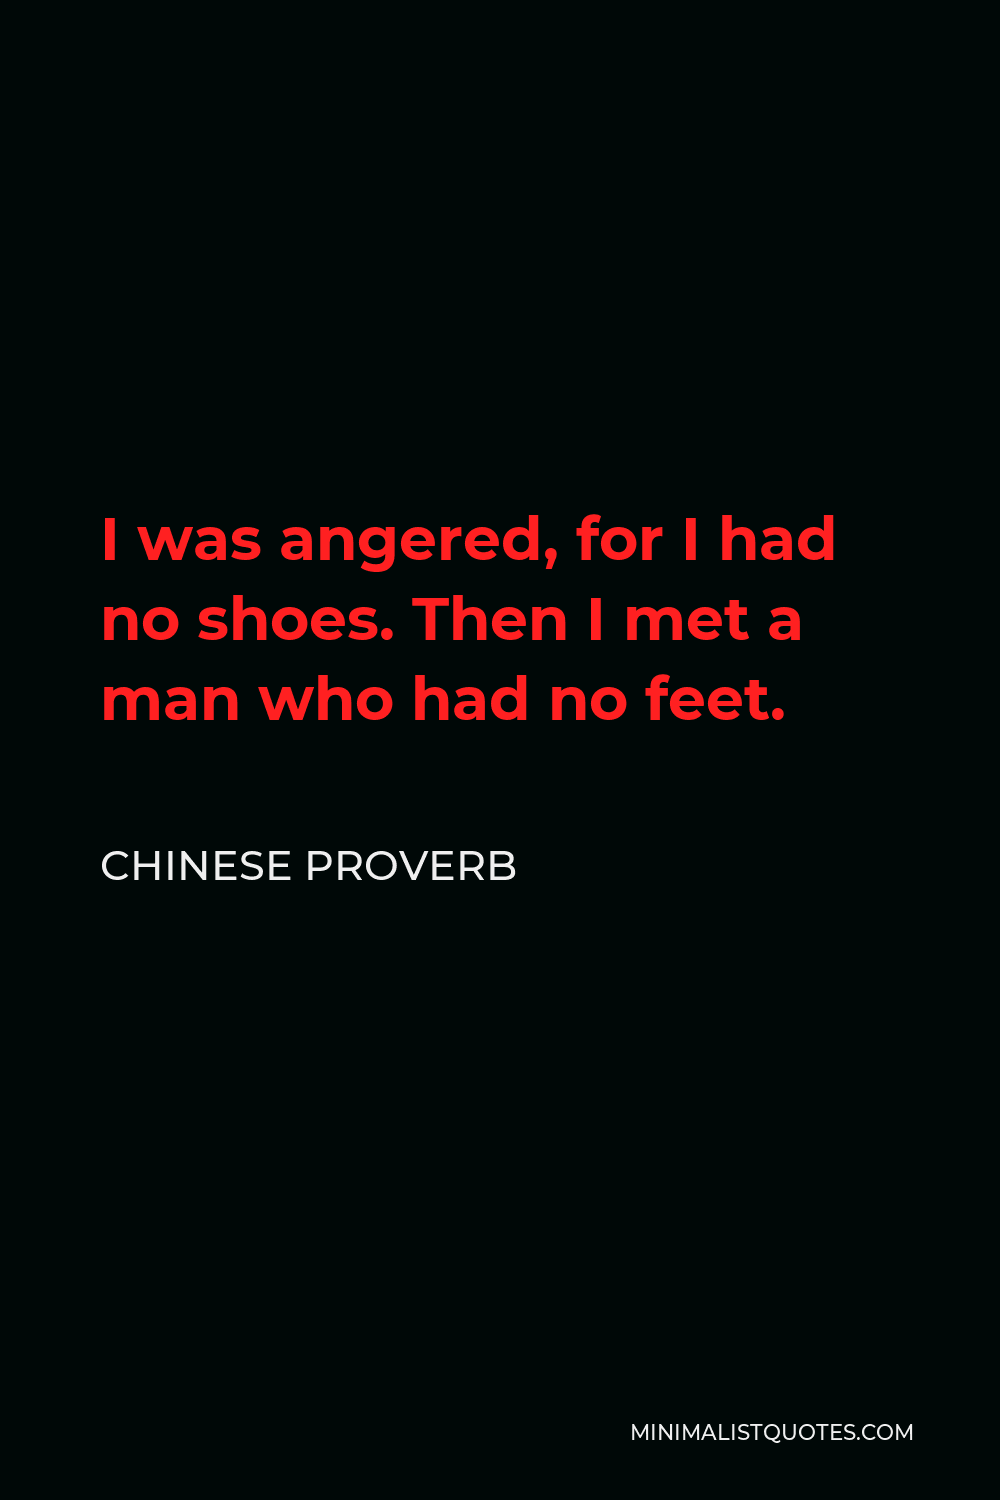 Chinese Proverb Quote - I was angered, for I had no shoes. Then I met a man who had no feet.